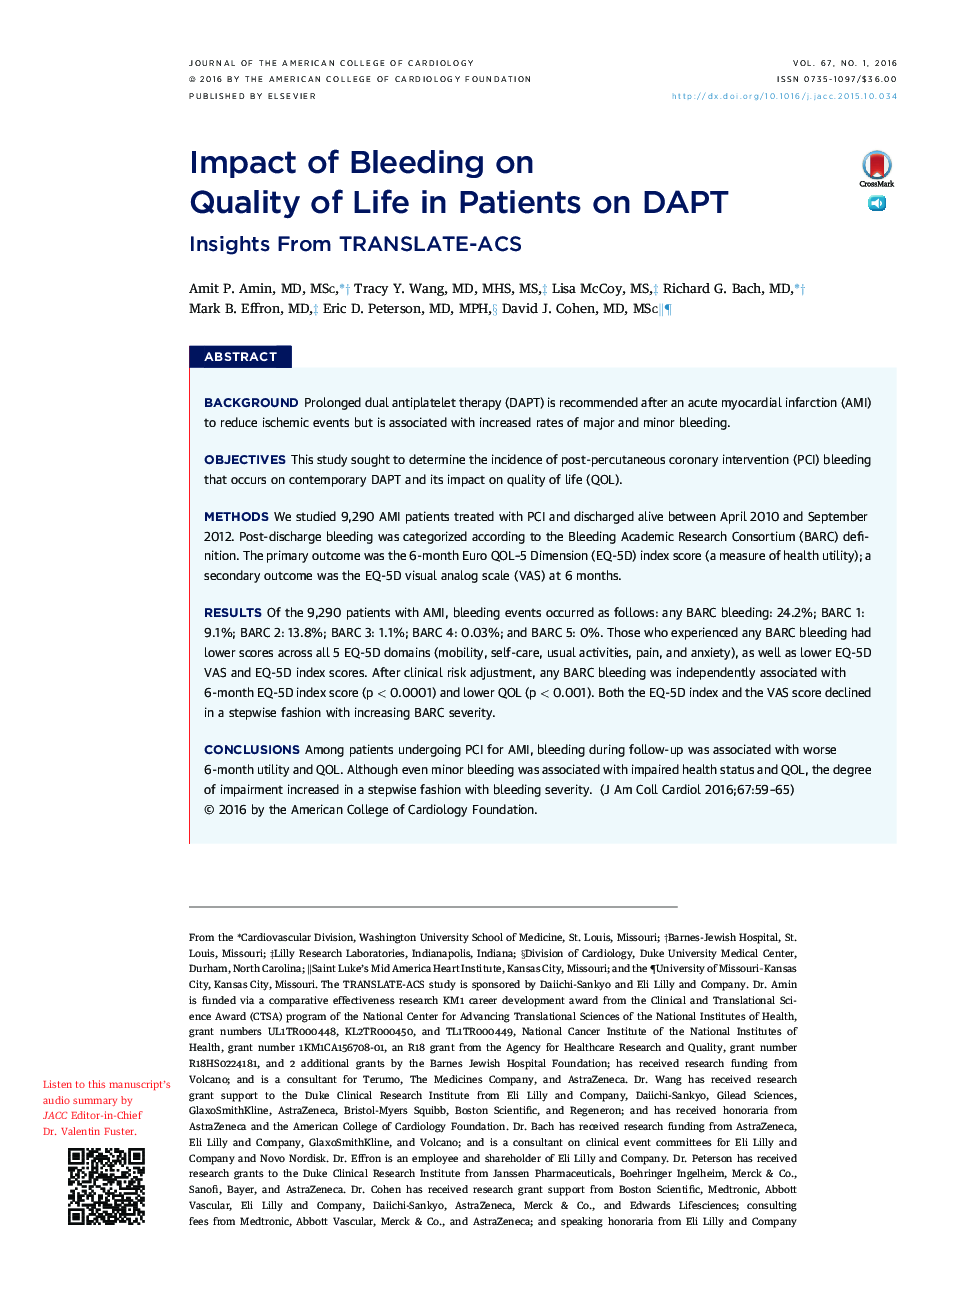 Impact of Bleeding on Quality of Life in Patients on DAPT: Insights From TRANSLATE-ACS